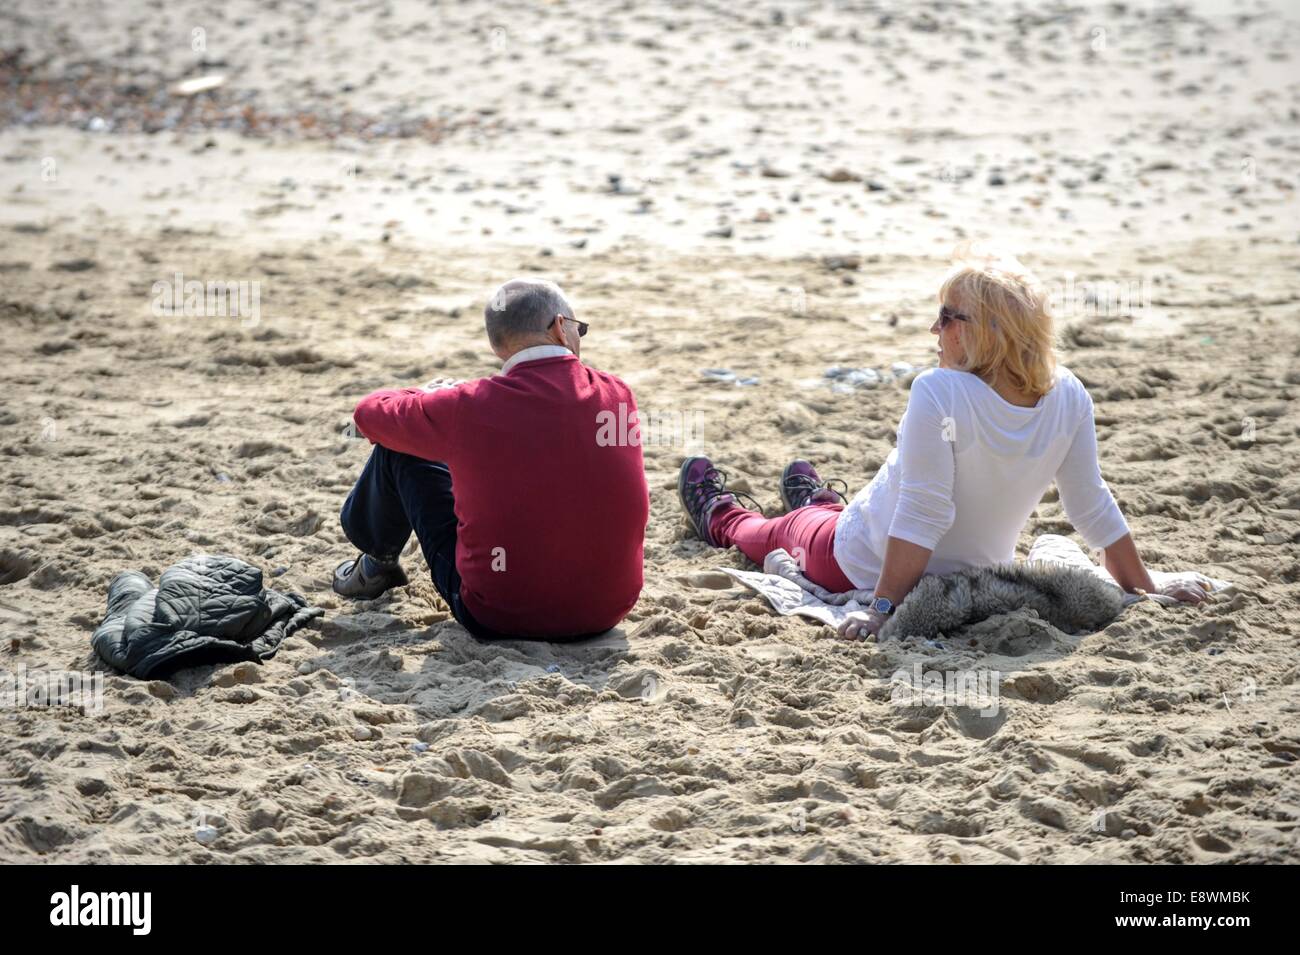 A couple are seen relaxing in the sun on the beach in Bournemouth, England on March 12 2014. Stock Photo